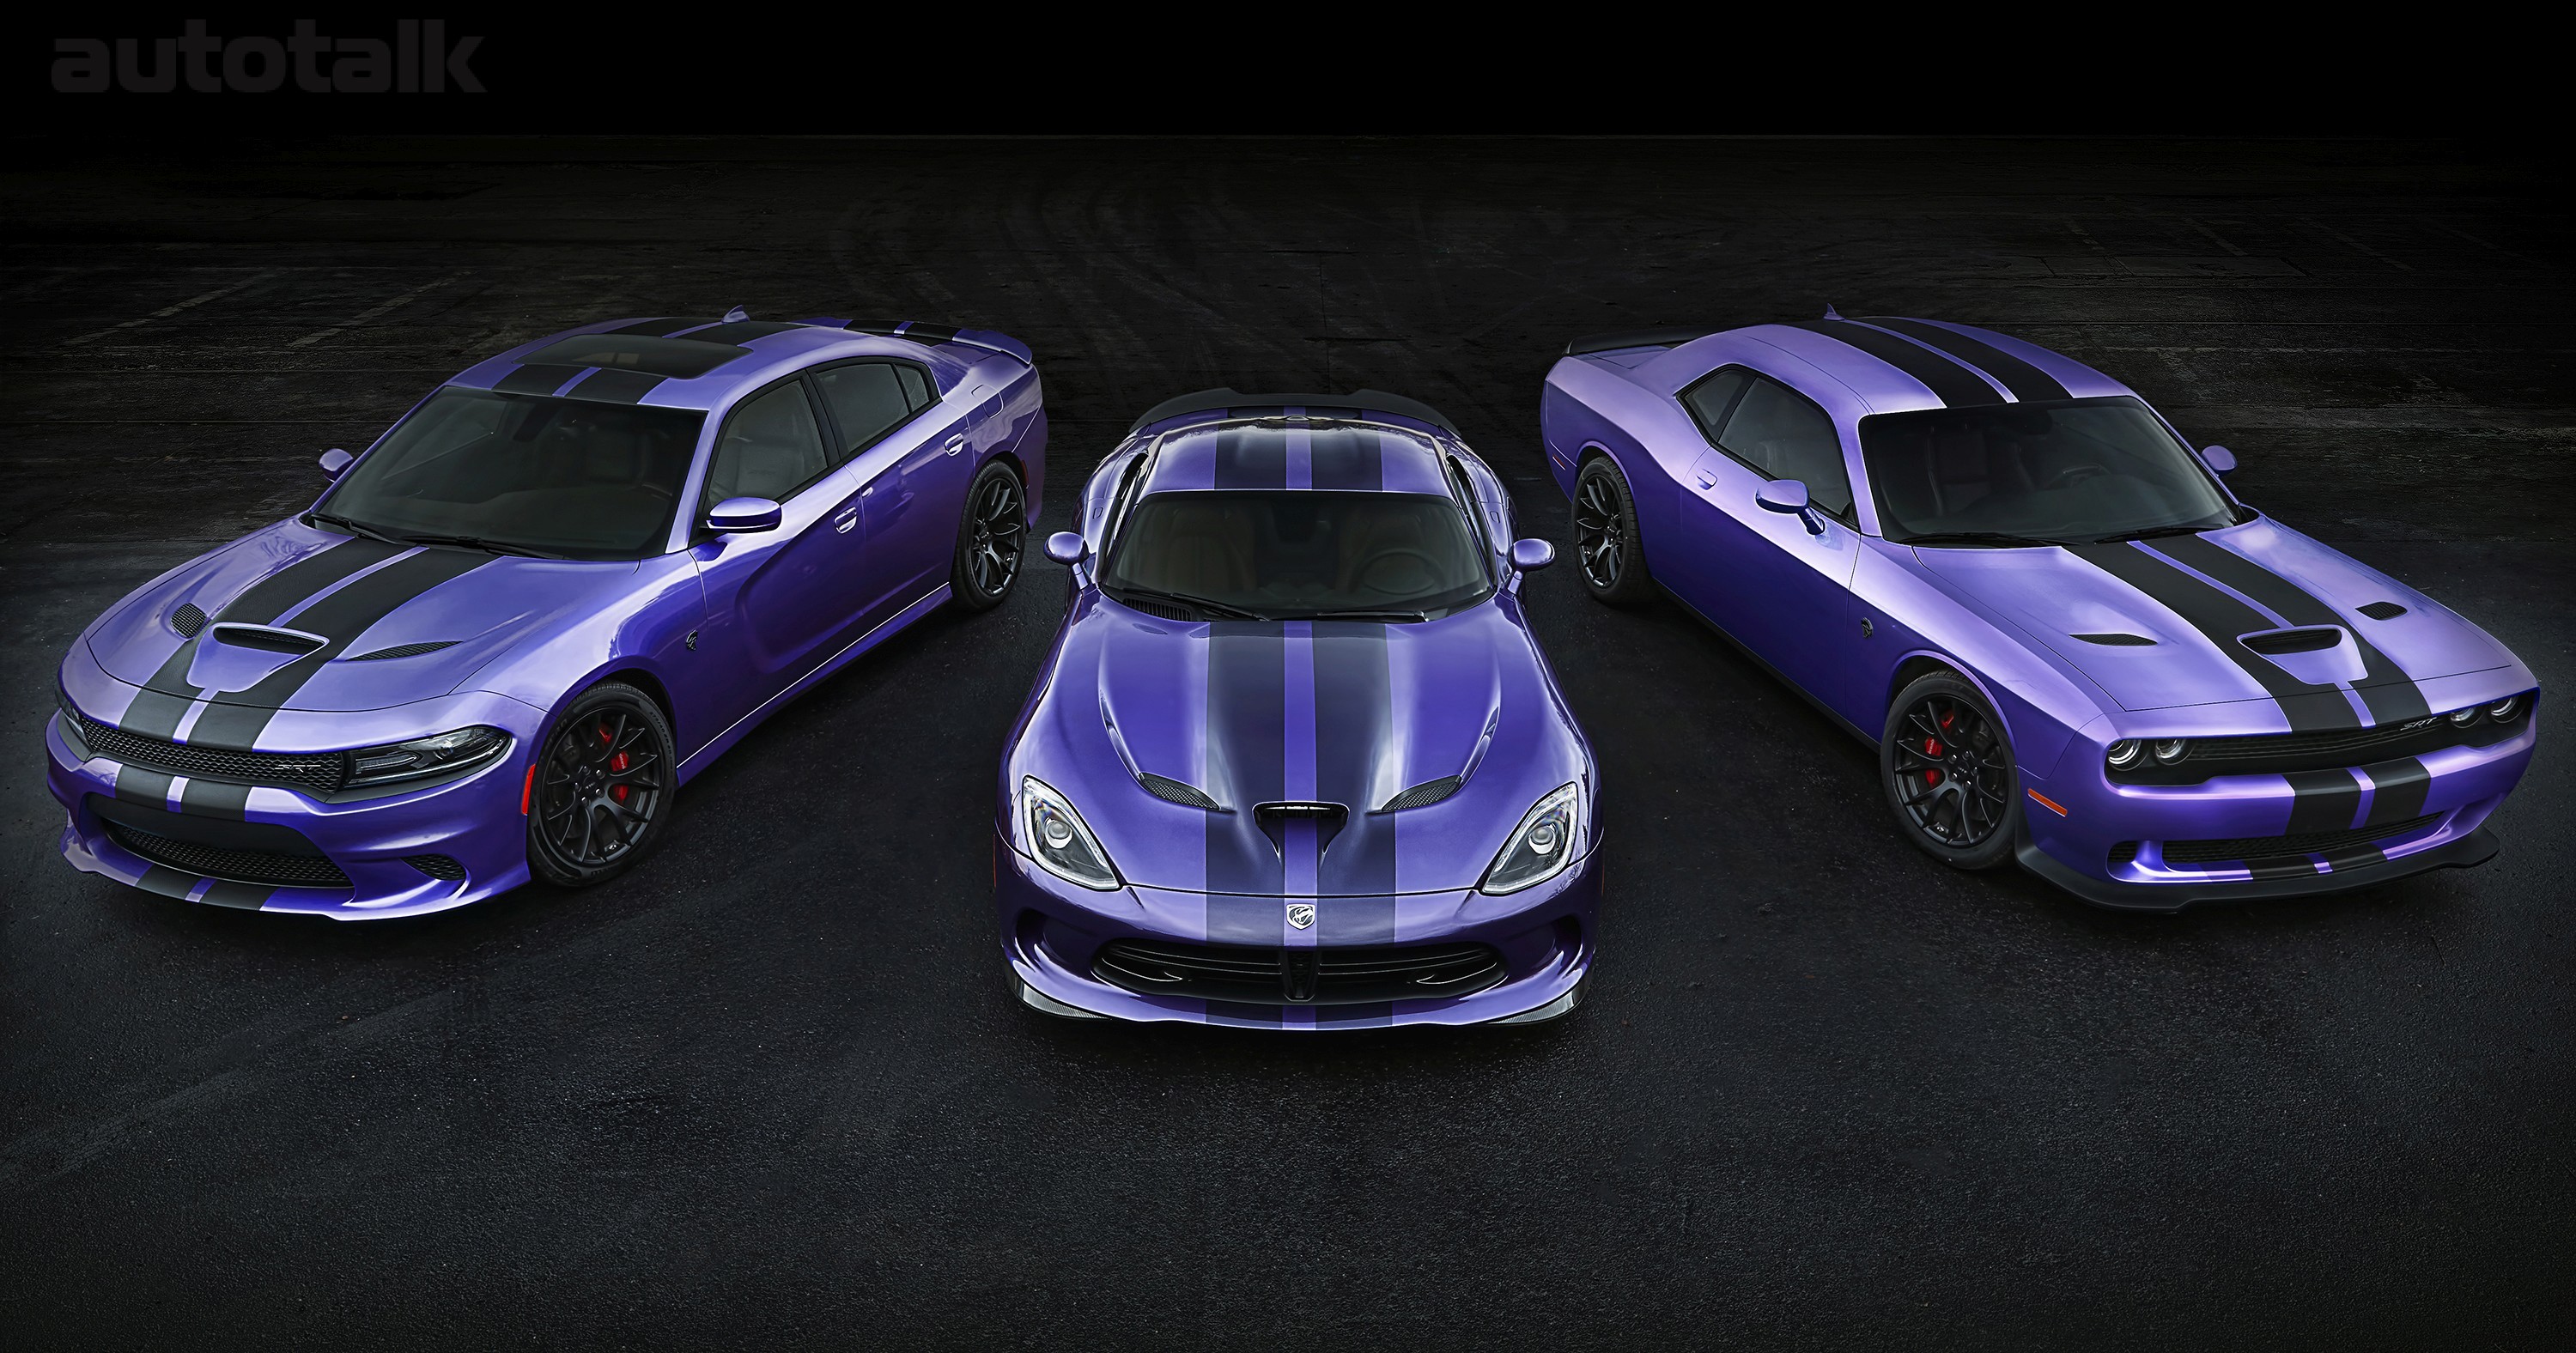 2016 Charger SRT Hellcat with Plum Crazy Paint and Stripes